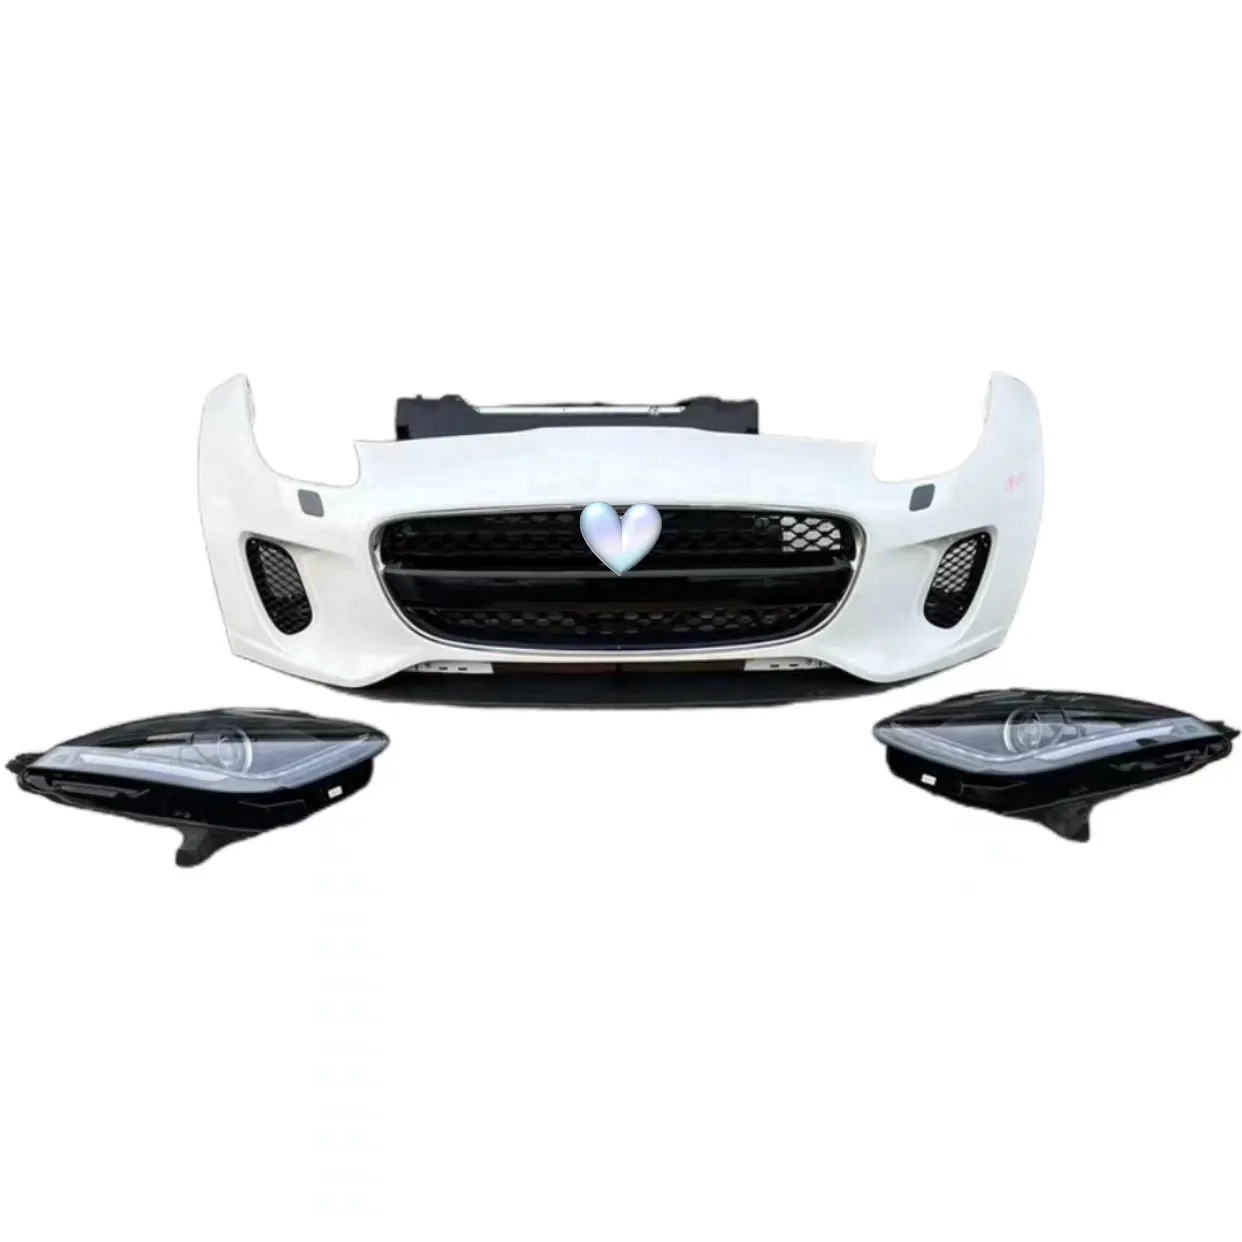 Original Used Front Bumper Assembly with Car Headlight Assembly for Jaguar F-TYPE Car Bumpers Accessories